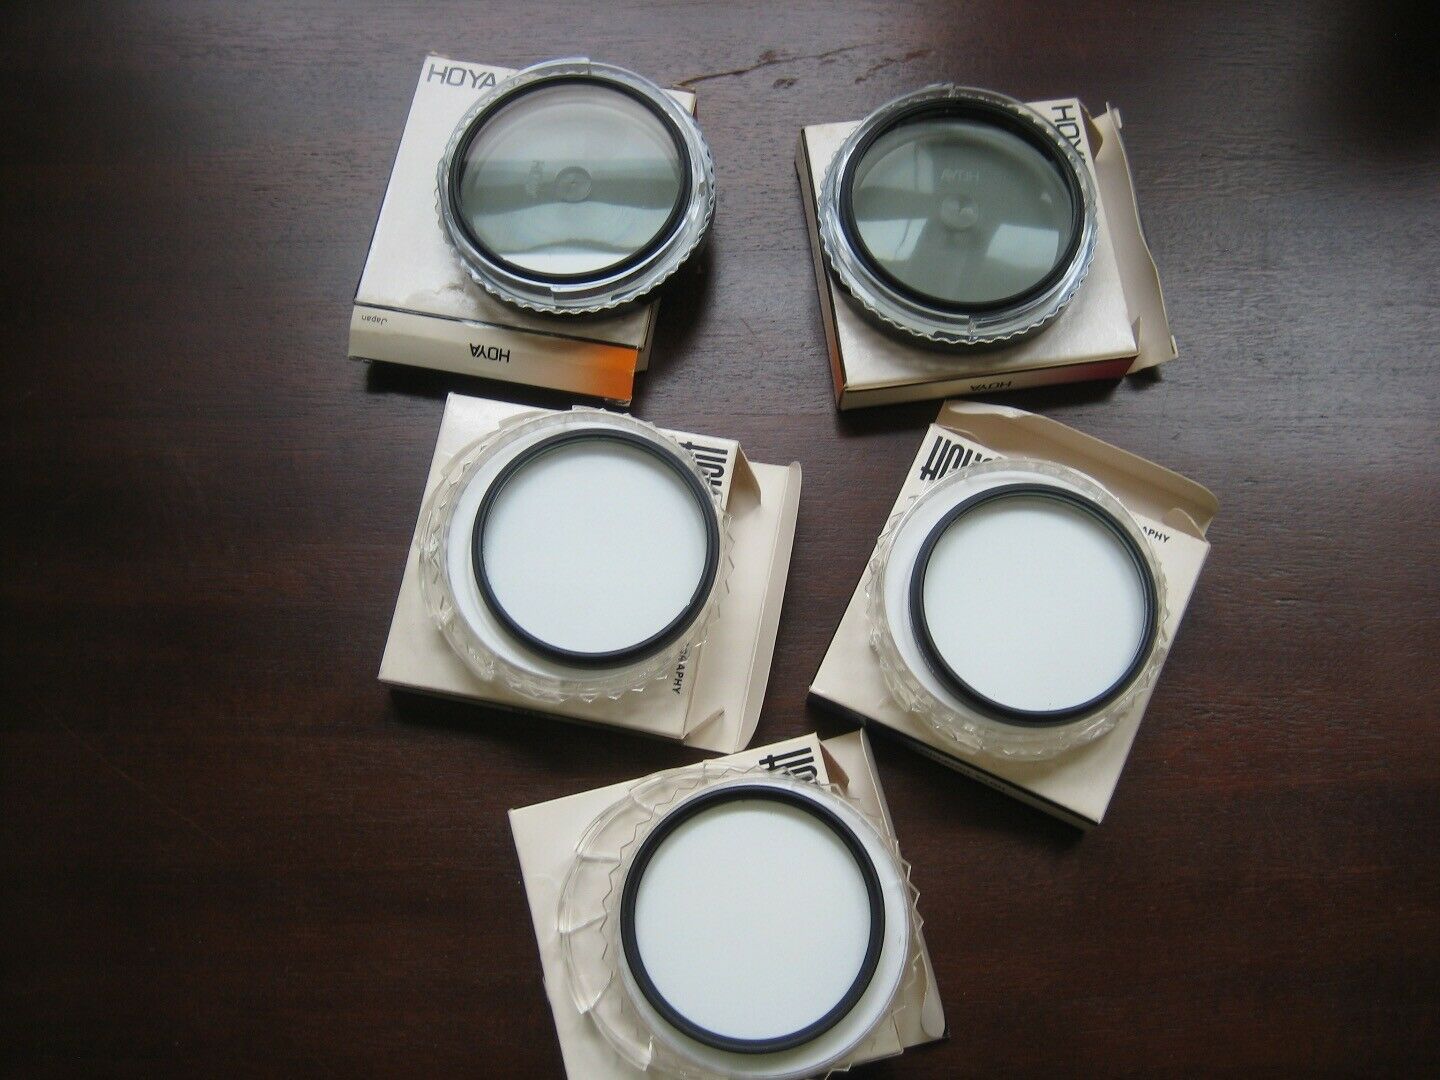 Set of 5 Lenses and Diffusers 67.0s & 62.0s by Hoya technical photography Japan - $32.66